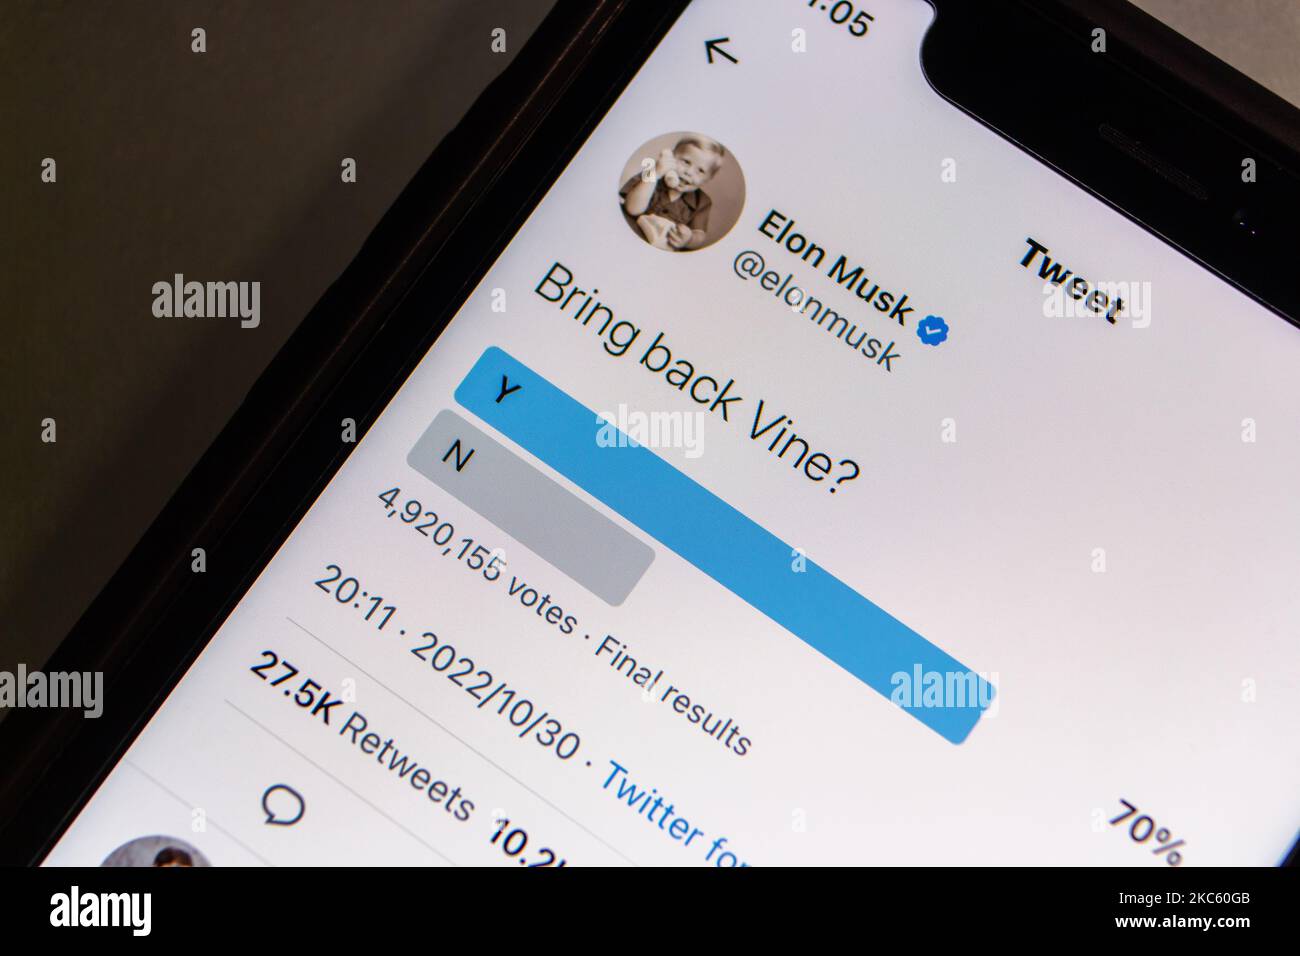 Vancouver, CANADA - Oct 29 2022 : Closeup a vote in a Twitter poll “Bring back Vine?” by Elon Musk (@elonmusk) on Twitter website on an iPhone. Stock Photo